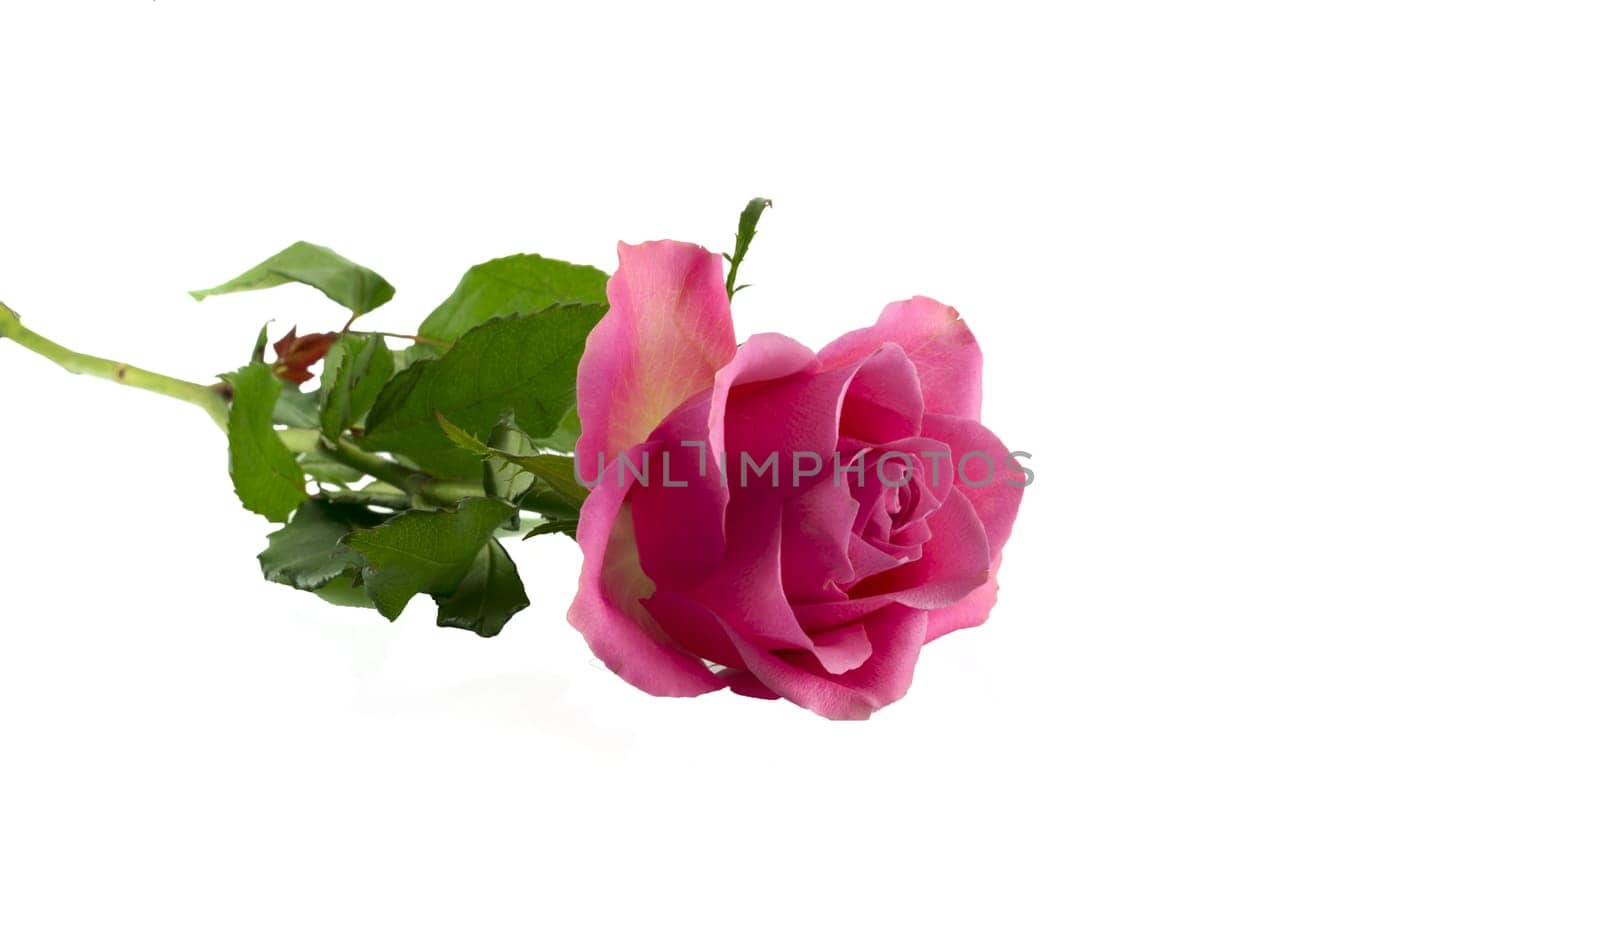 pink rose on white background by compuinfoto